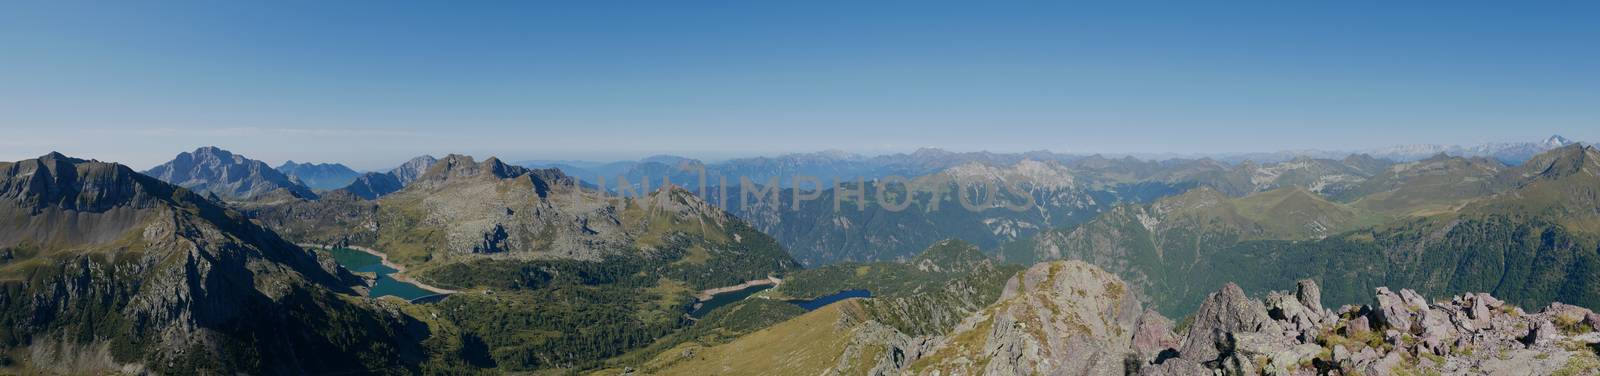 Panoramic view of lake Colombo basin and dam on the Bergamo Alps
 by gigidread